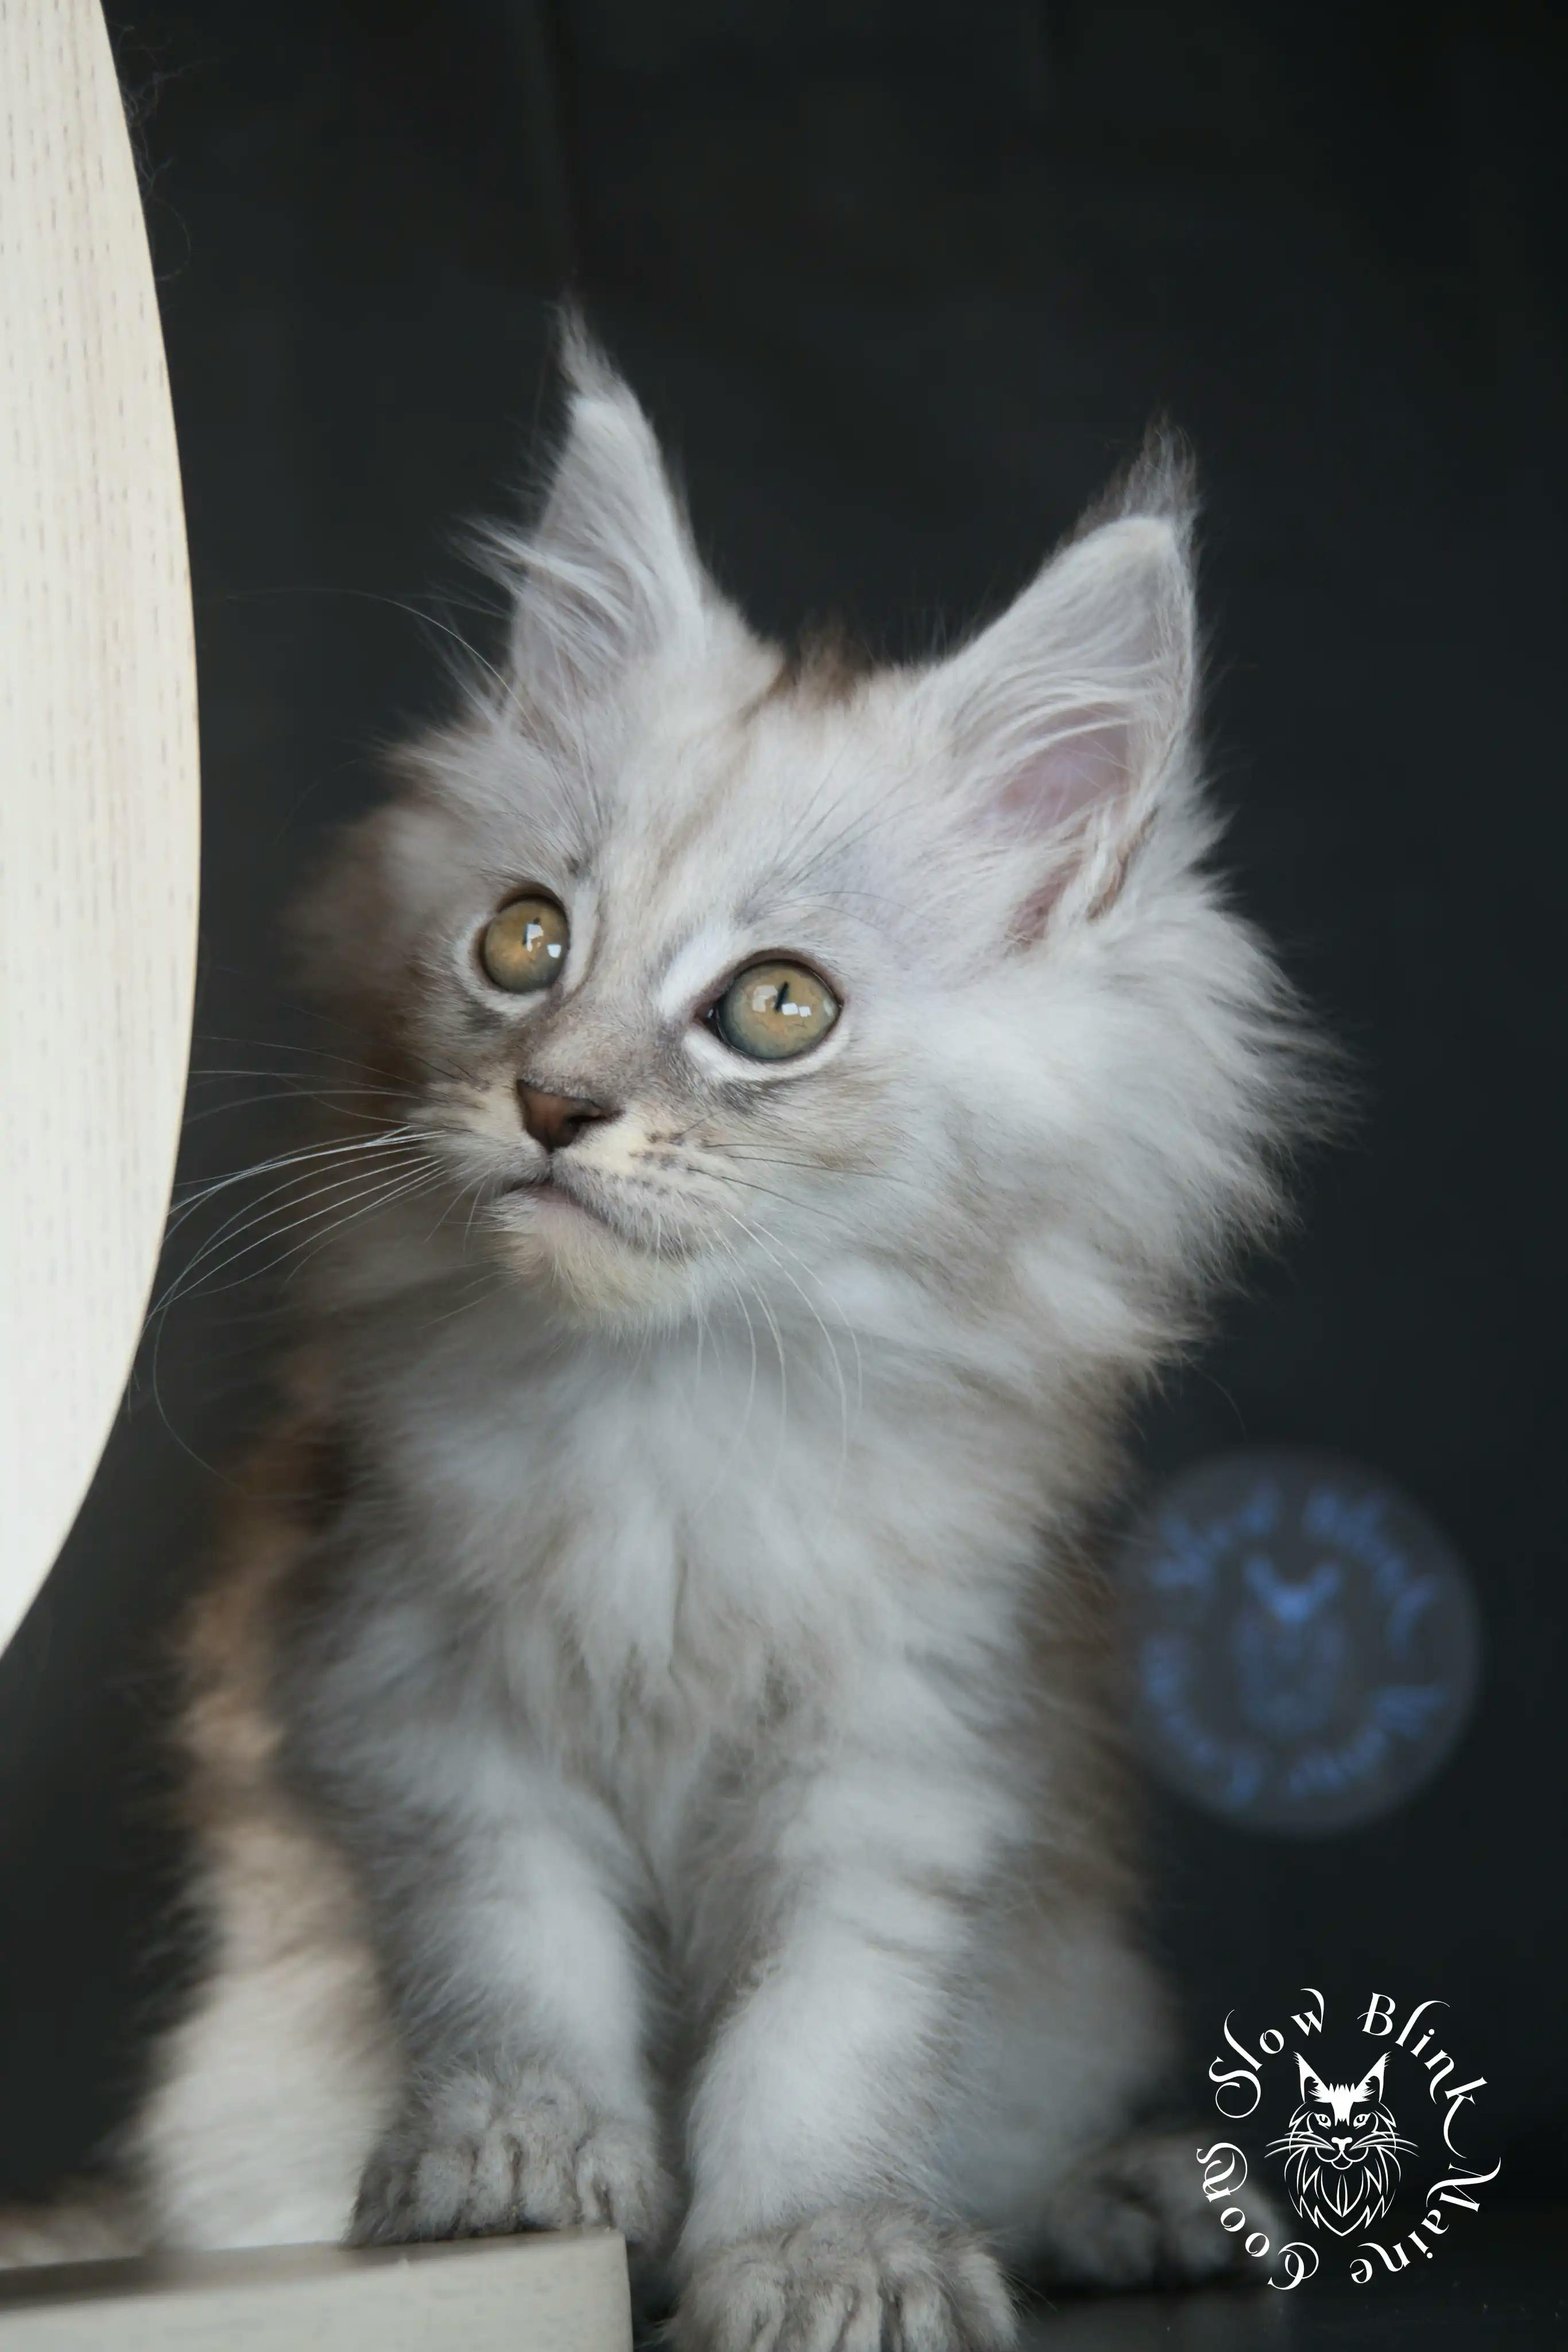 High Silver Maine Coon Kittens > black silver tabby maine coon kitten | ems code ns 22 23 24 25 | slowblinkmainecoons | 601